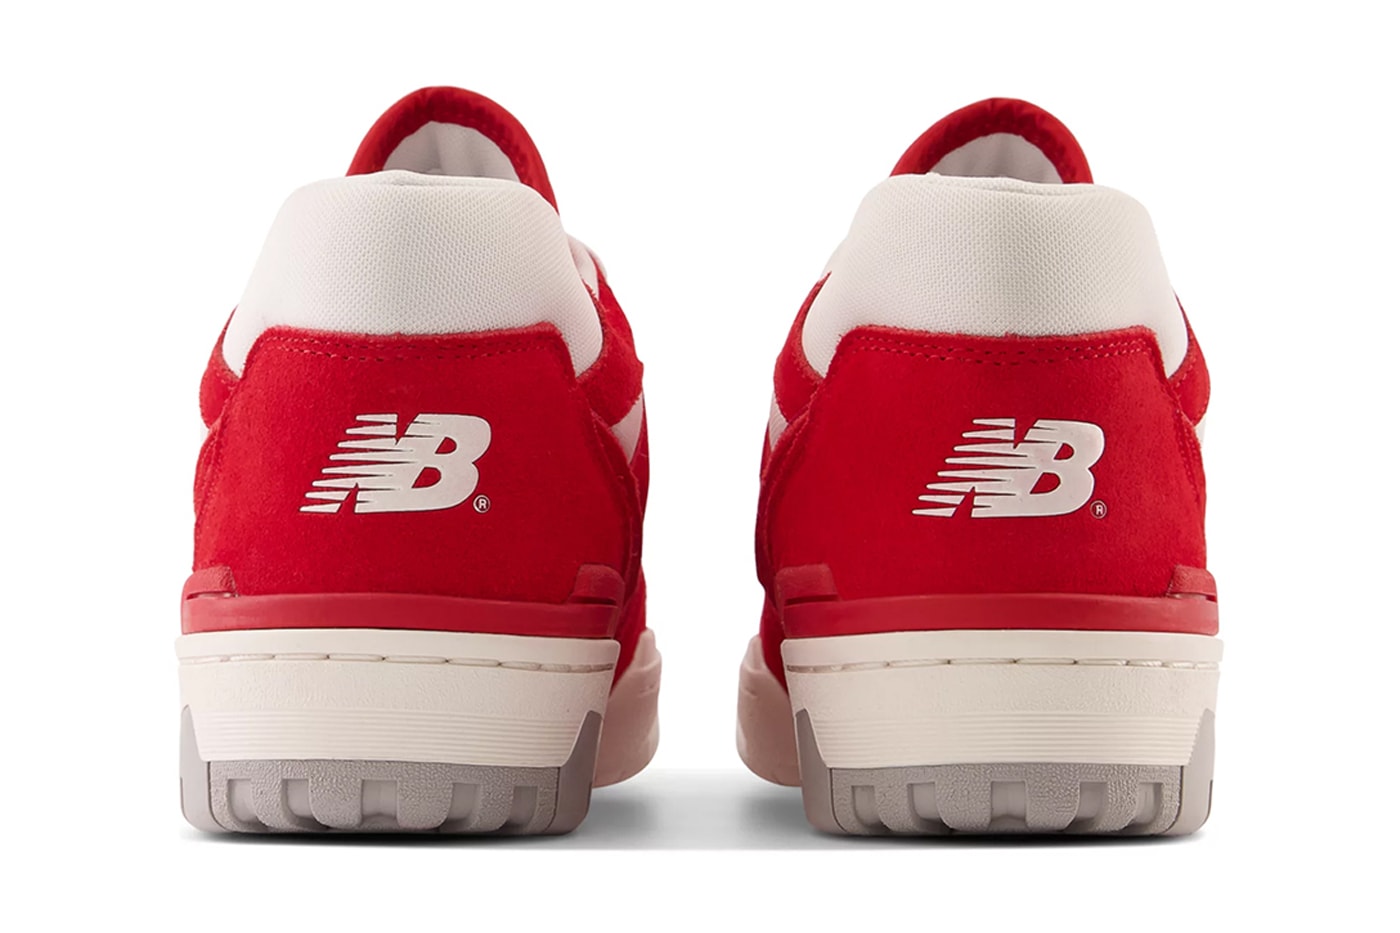 New Balance 550 Arrives in the USA-Inspired Tri-Color "Suede Pack" team red BB550VND concrete BB550VNB royal blue BB550VNA basketball low tops shoes sneakers nbs